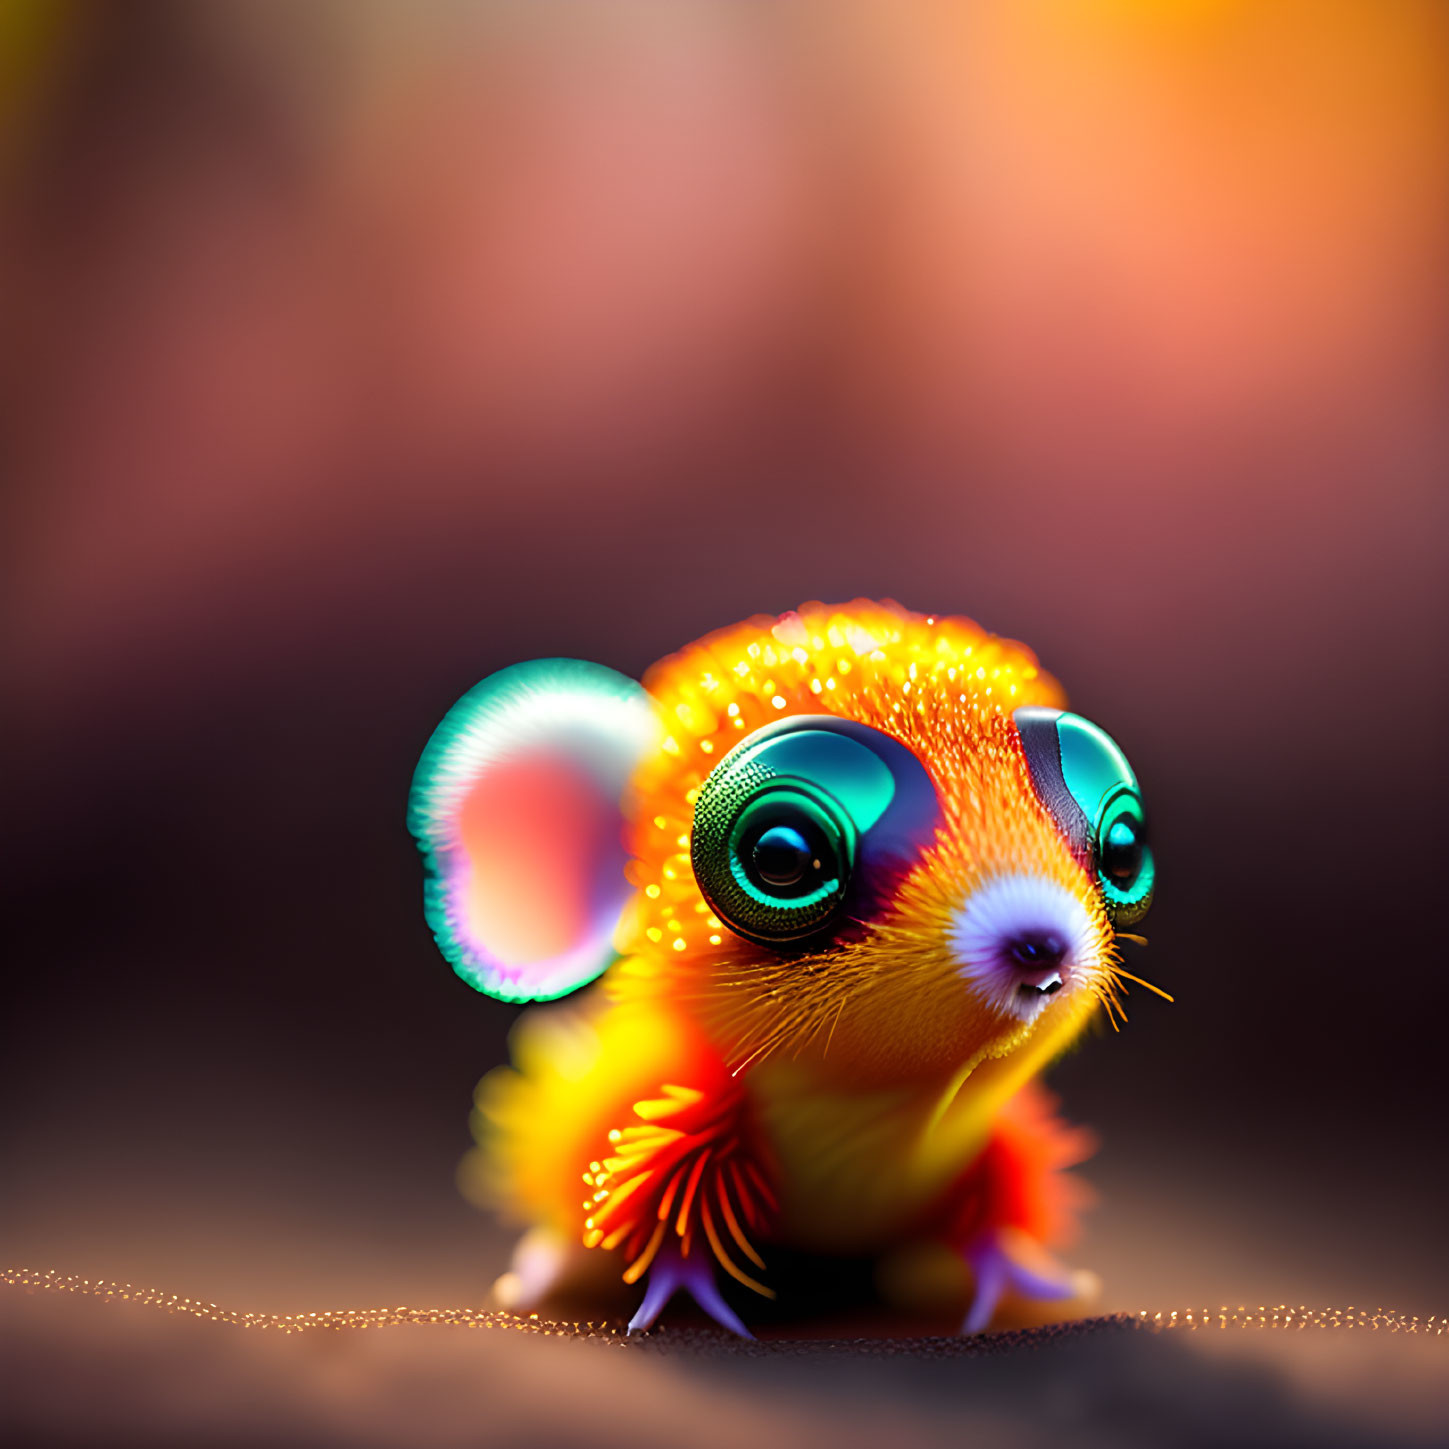 Colorful Small Creature with Glossy Eyes and Multicolored Fur